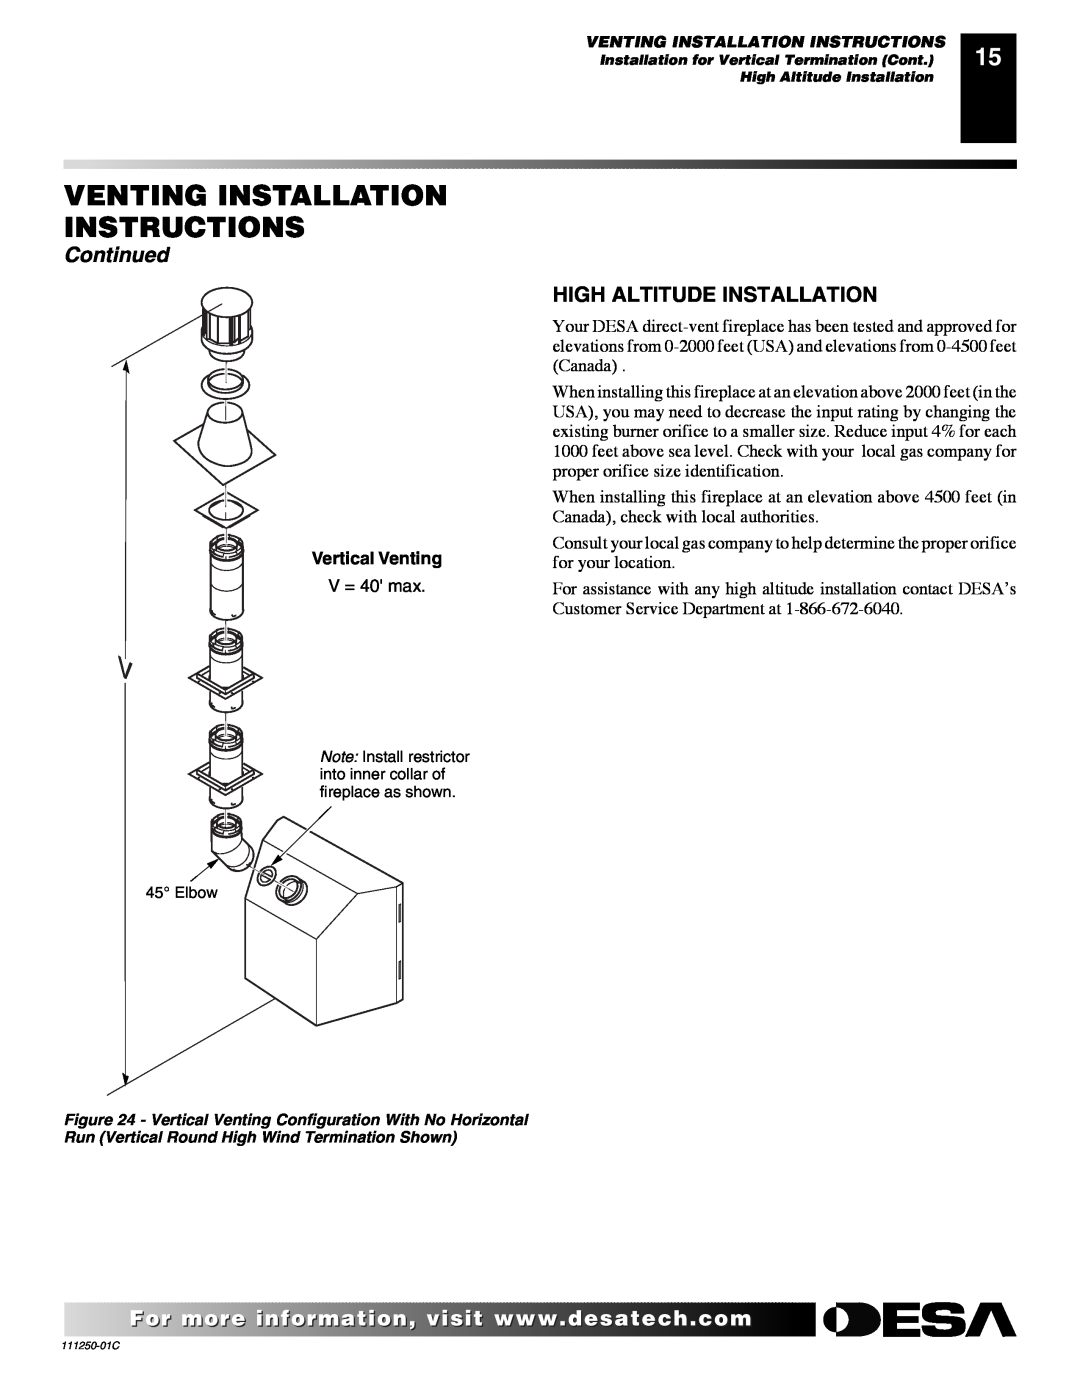 Desa (V)T36NA SERIES High Altitude Installation, Venting Installation Instructions, Continued, Vertical Venting 